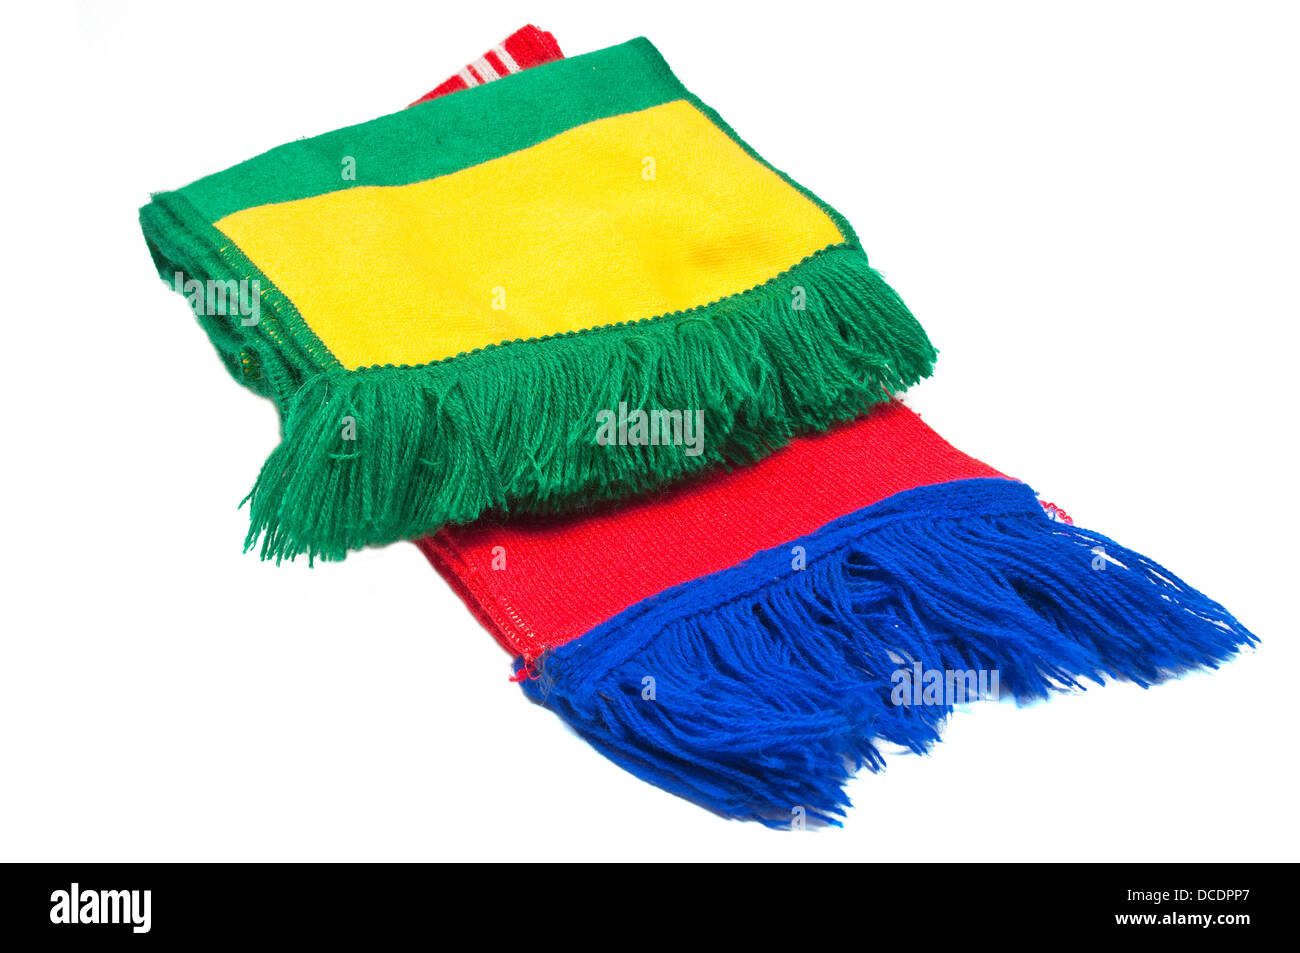 Soccer Scarf High Resolution Stock Photography and Images - Alamy